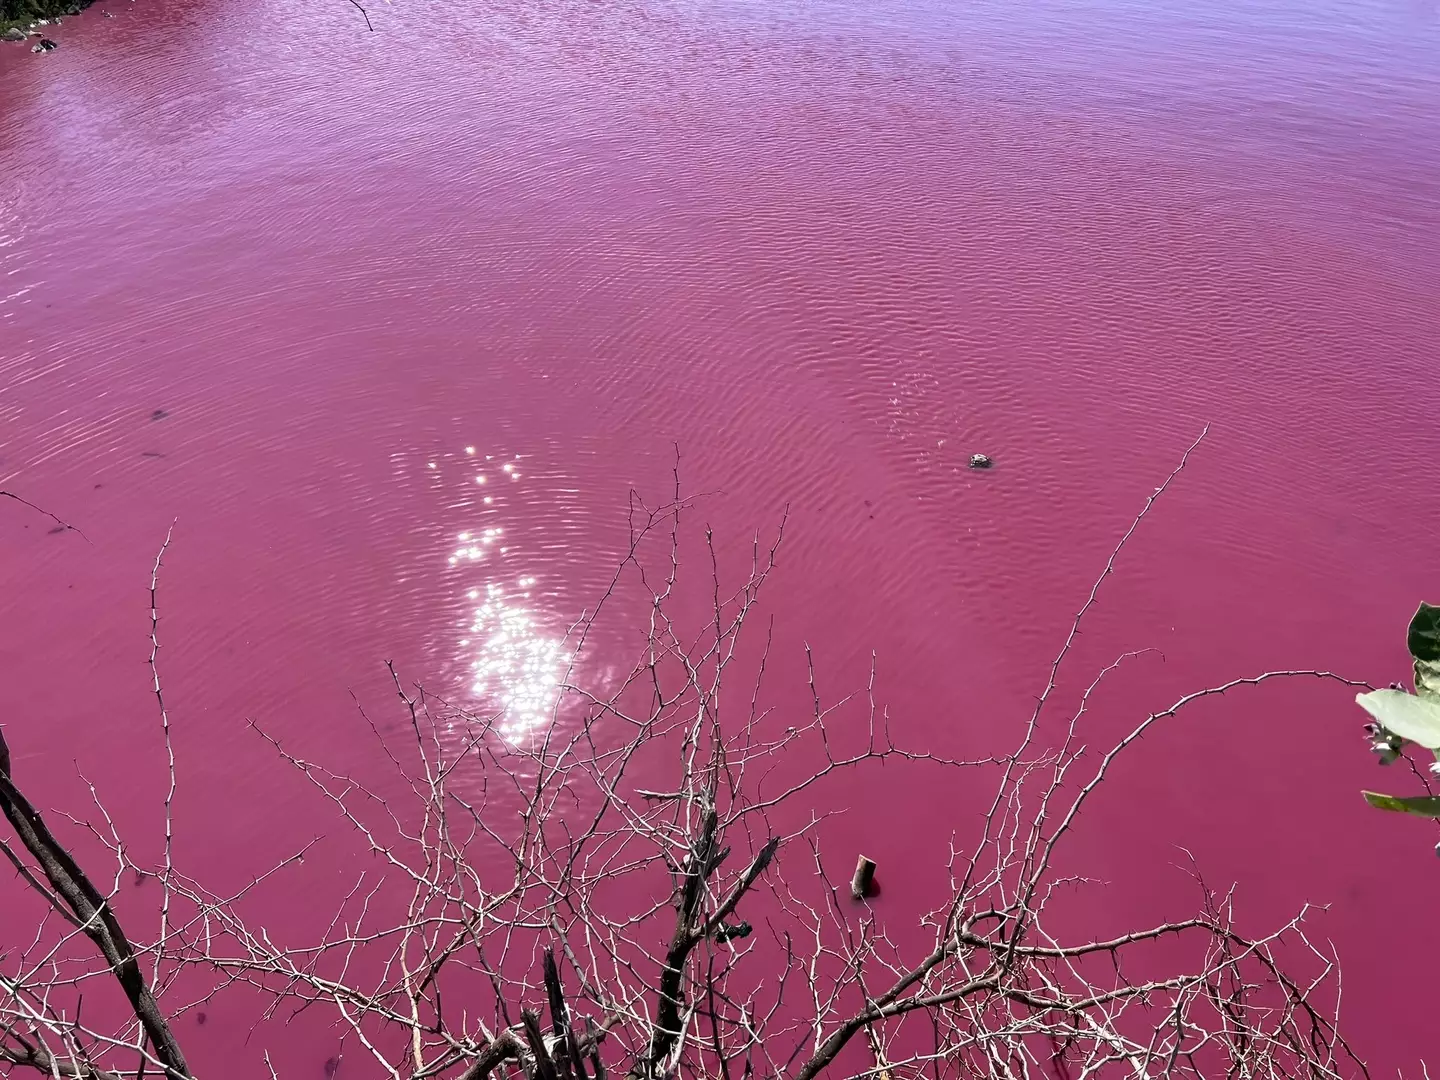 This pink pond in Maui is causing some concern.